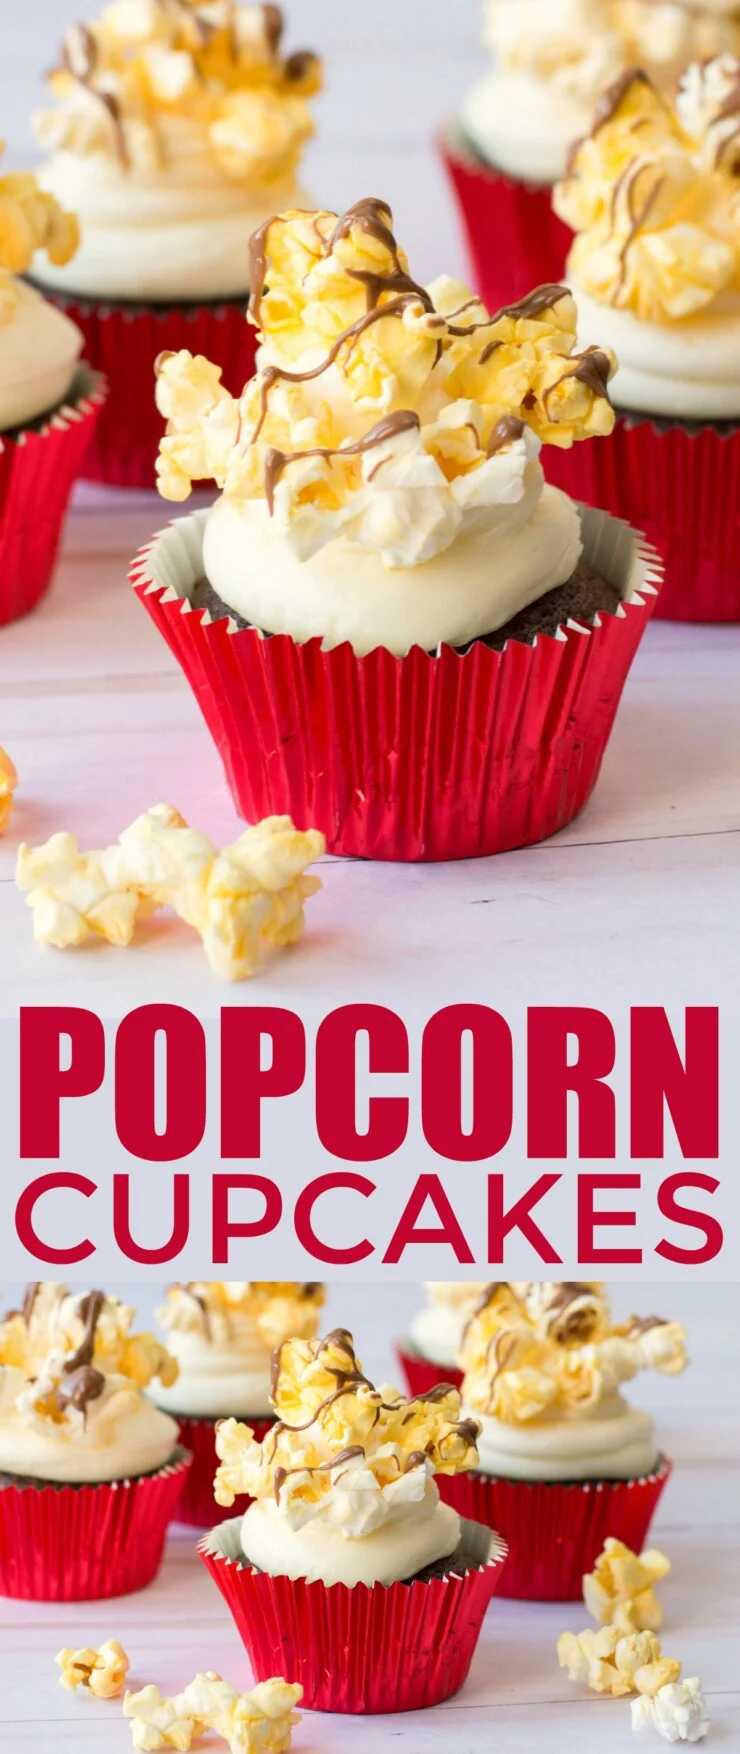 Make family movie night extra special with these adorable Popcorn Cucakes! Perfect for a movie themed birthday party or just for fun. 